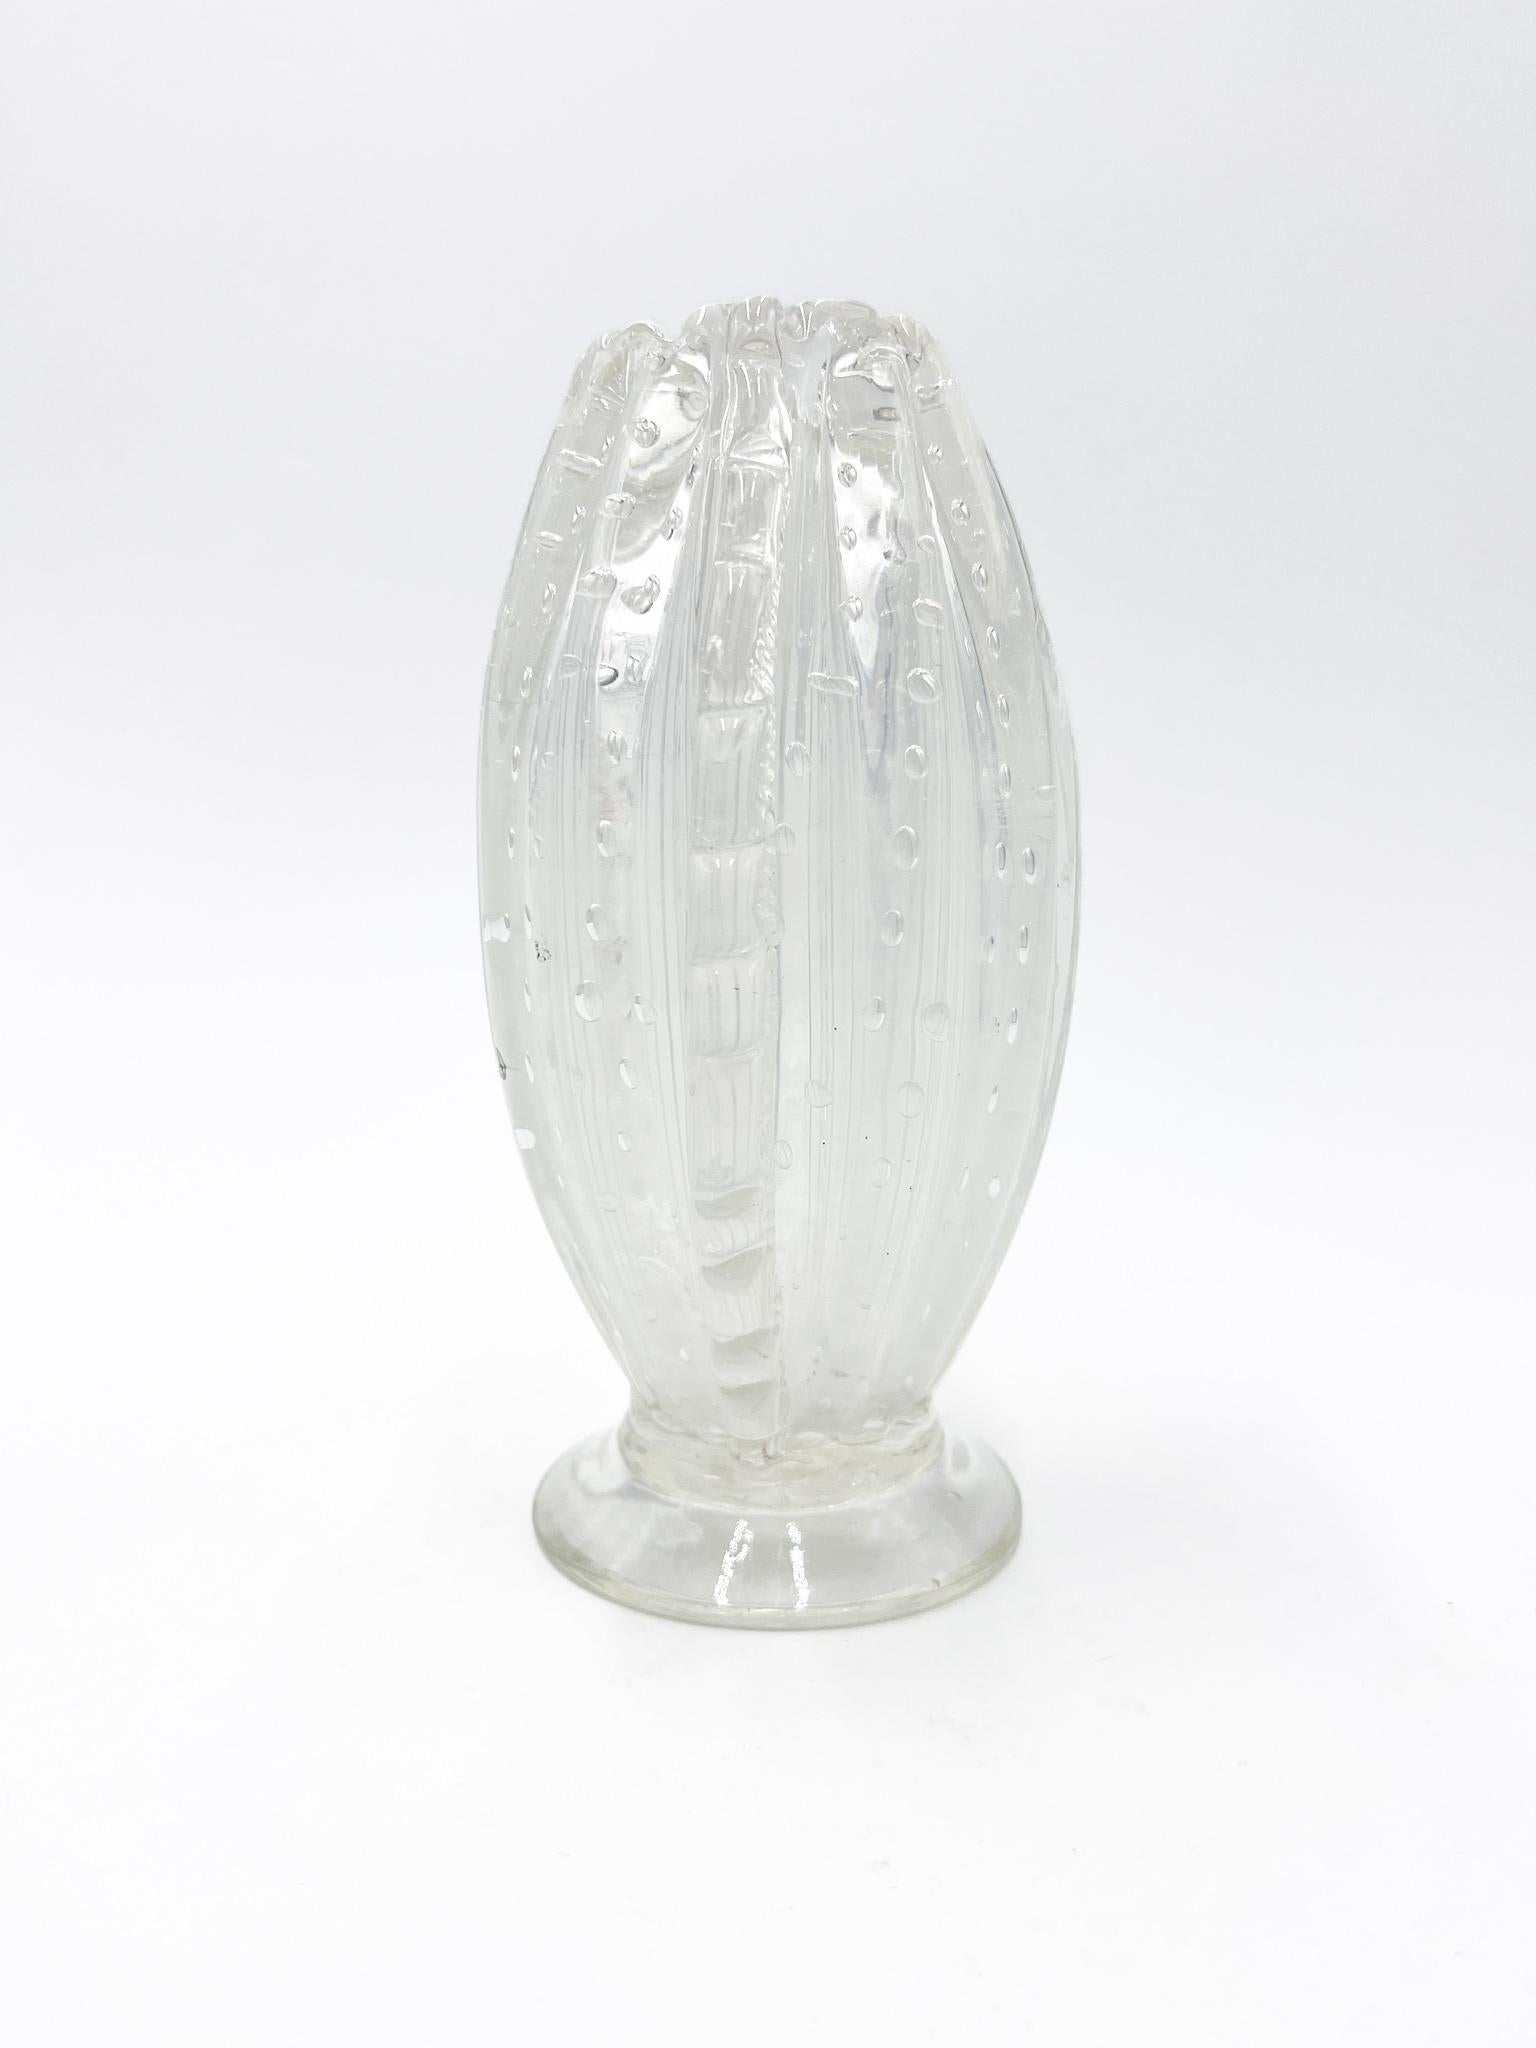 Murano Glass Vase by Barovier from the 1960s 1